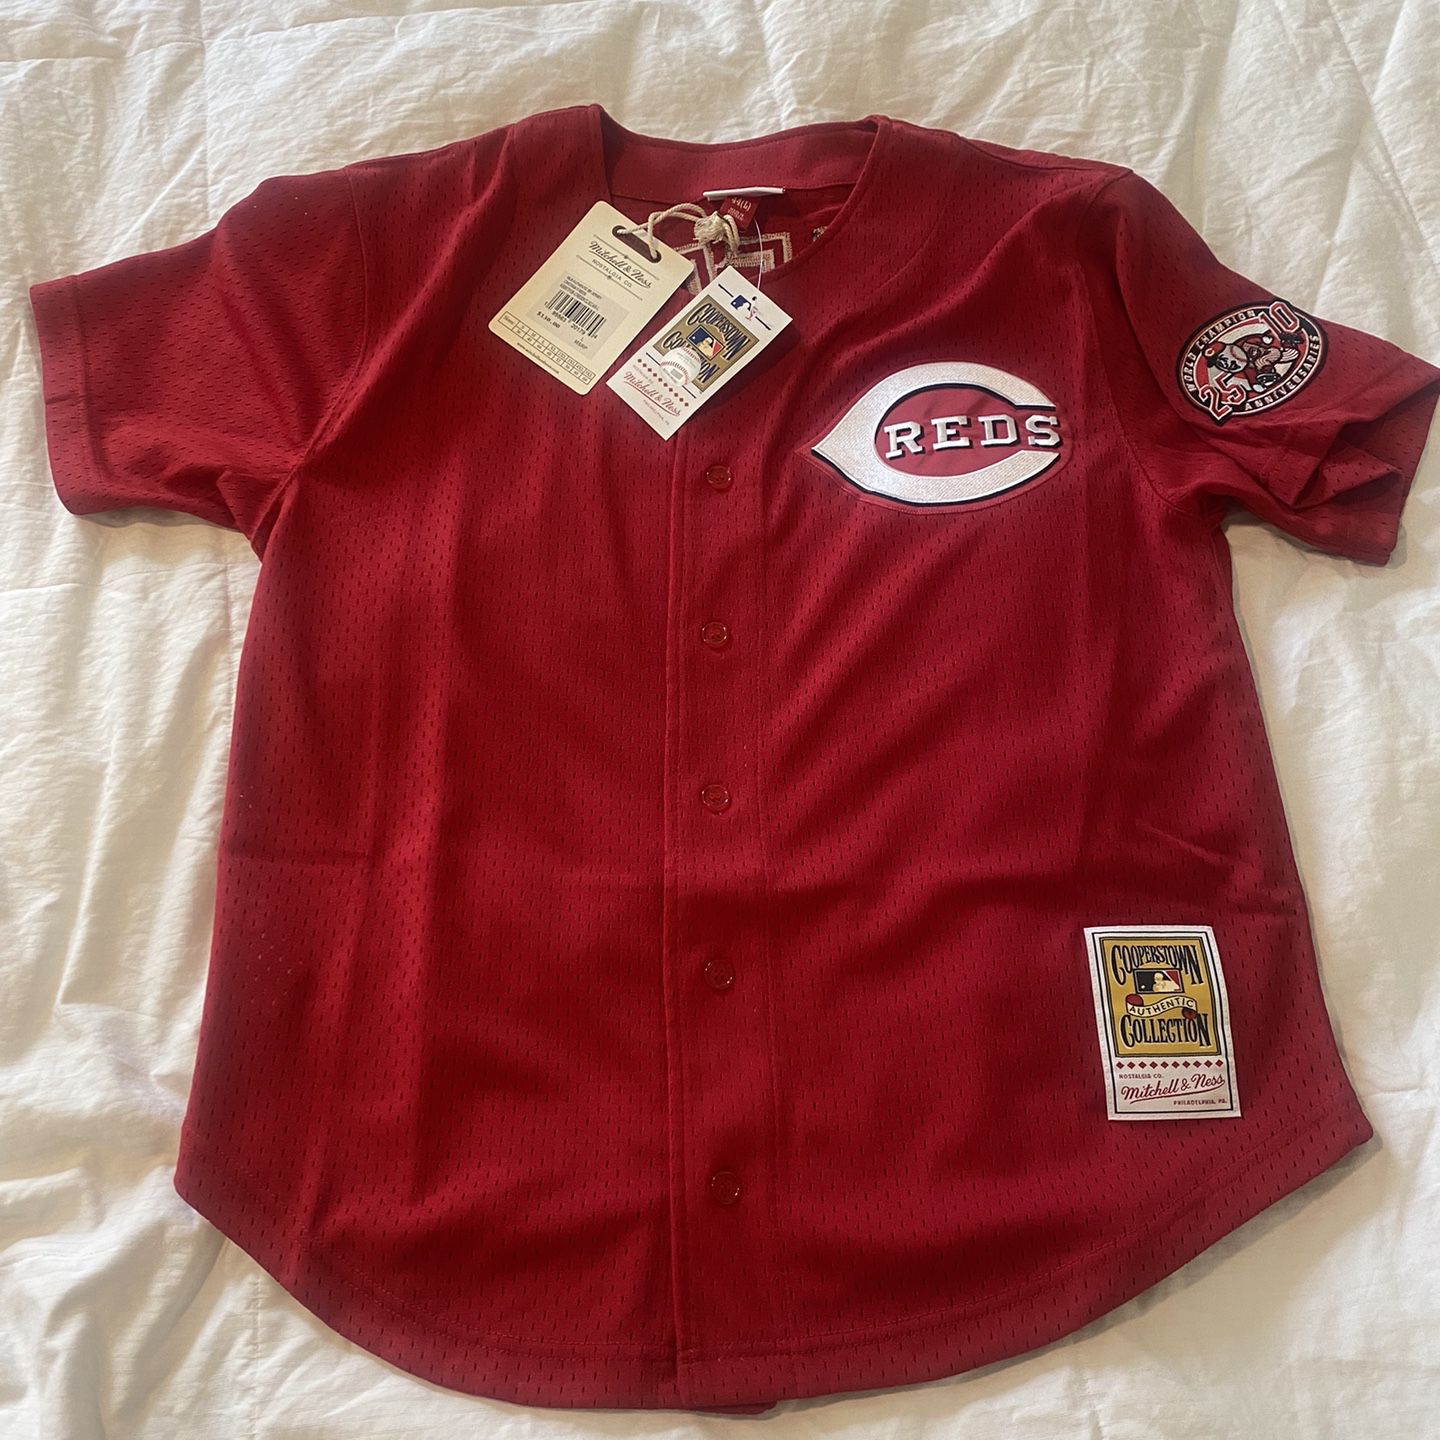 Cincinnati Reds Ken Griffey Jr. Mitchell & Ness Black Cooperstown  Collection Batting Practice Jersey (LARGE & XL) for Sale in Indianapolis,  IN - OfferUp